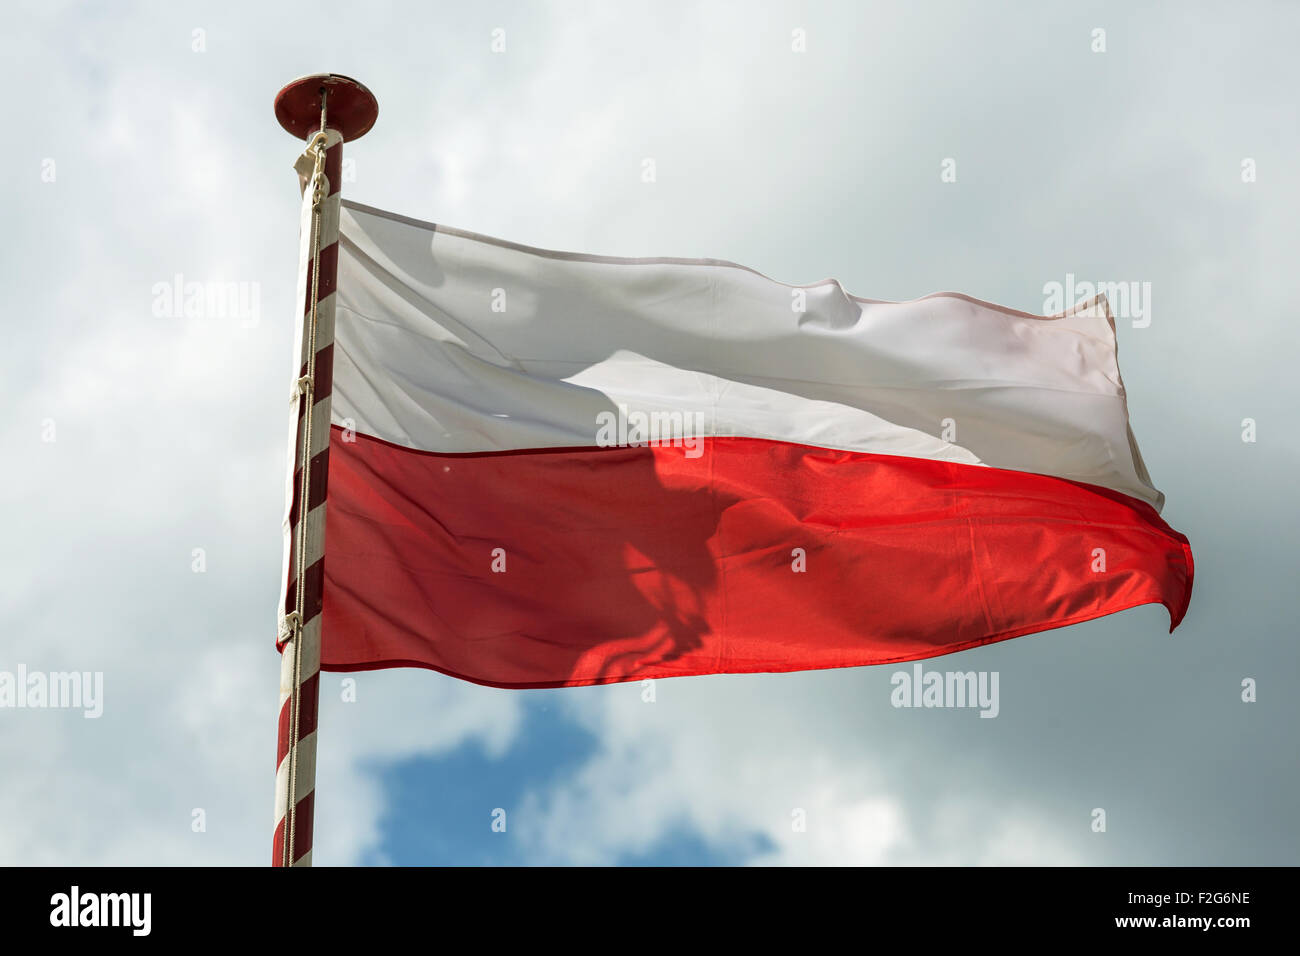 02.05.2015, Wroclaw, Lower Silesia, Poland - Polish flag in the commission of the day the flag (Obchody Dnia Flagi) / Polish Stock Photo